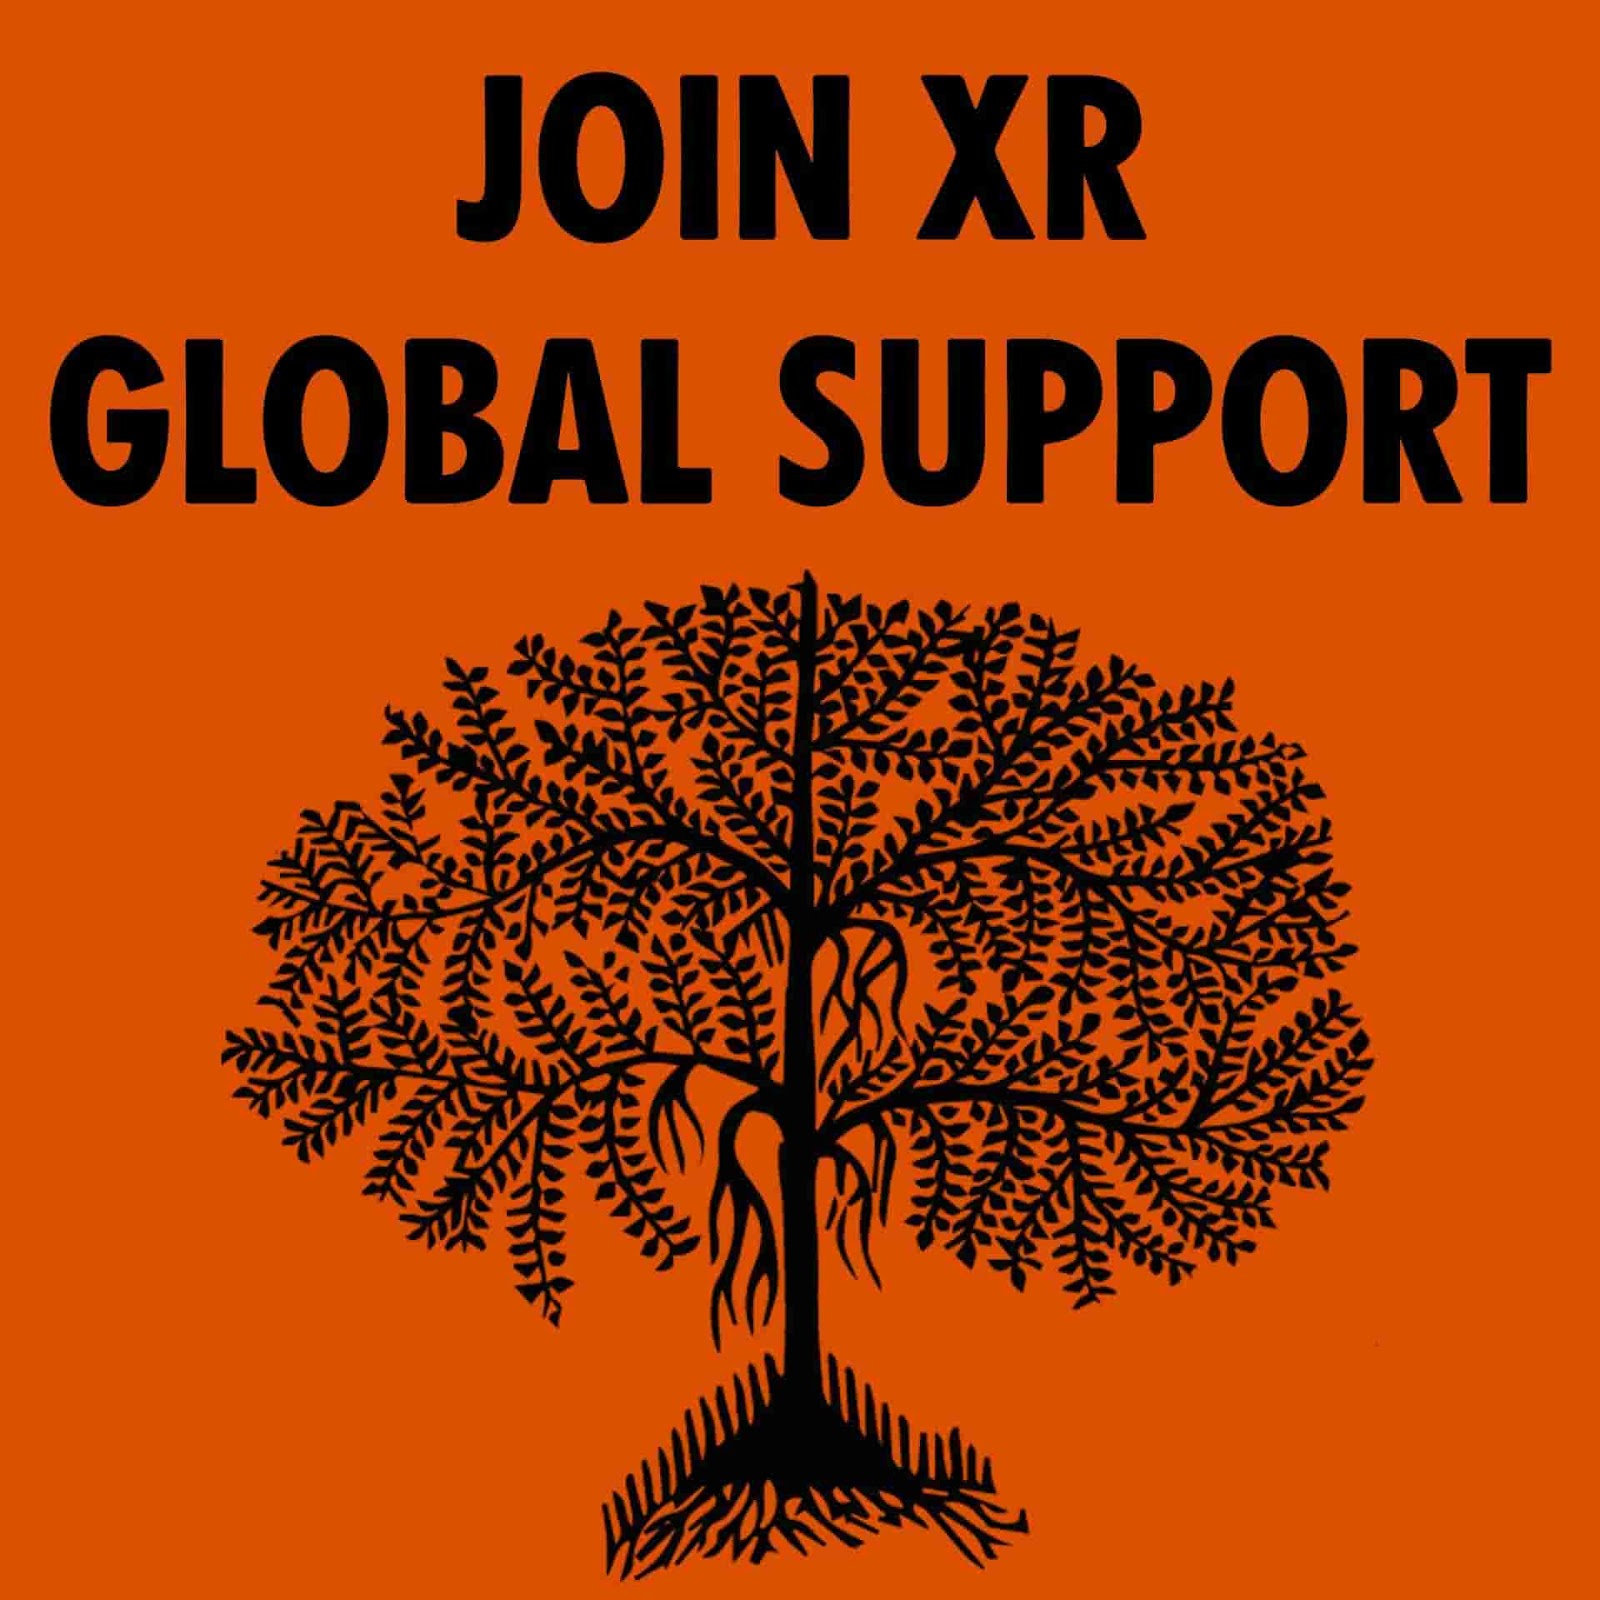 Branching tree on orange background with JOIN XR GLOBAL SUPPORT